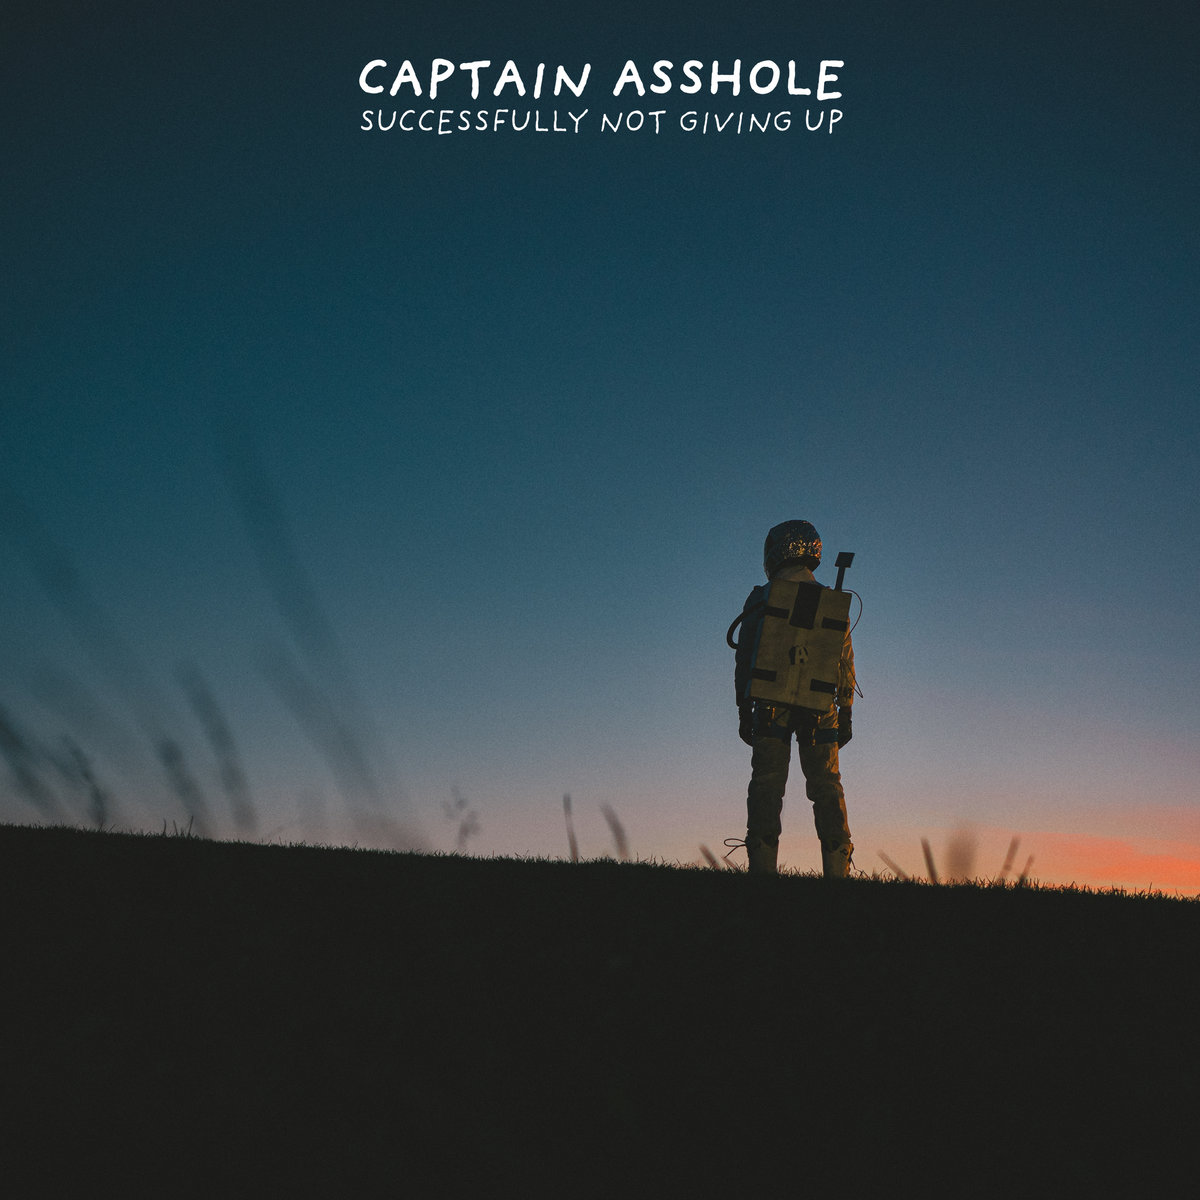 Drinkscussing: Captain Asshole – Successfully Not Giving Up